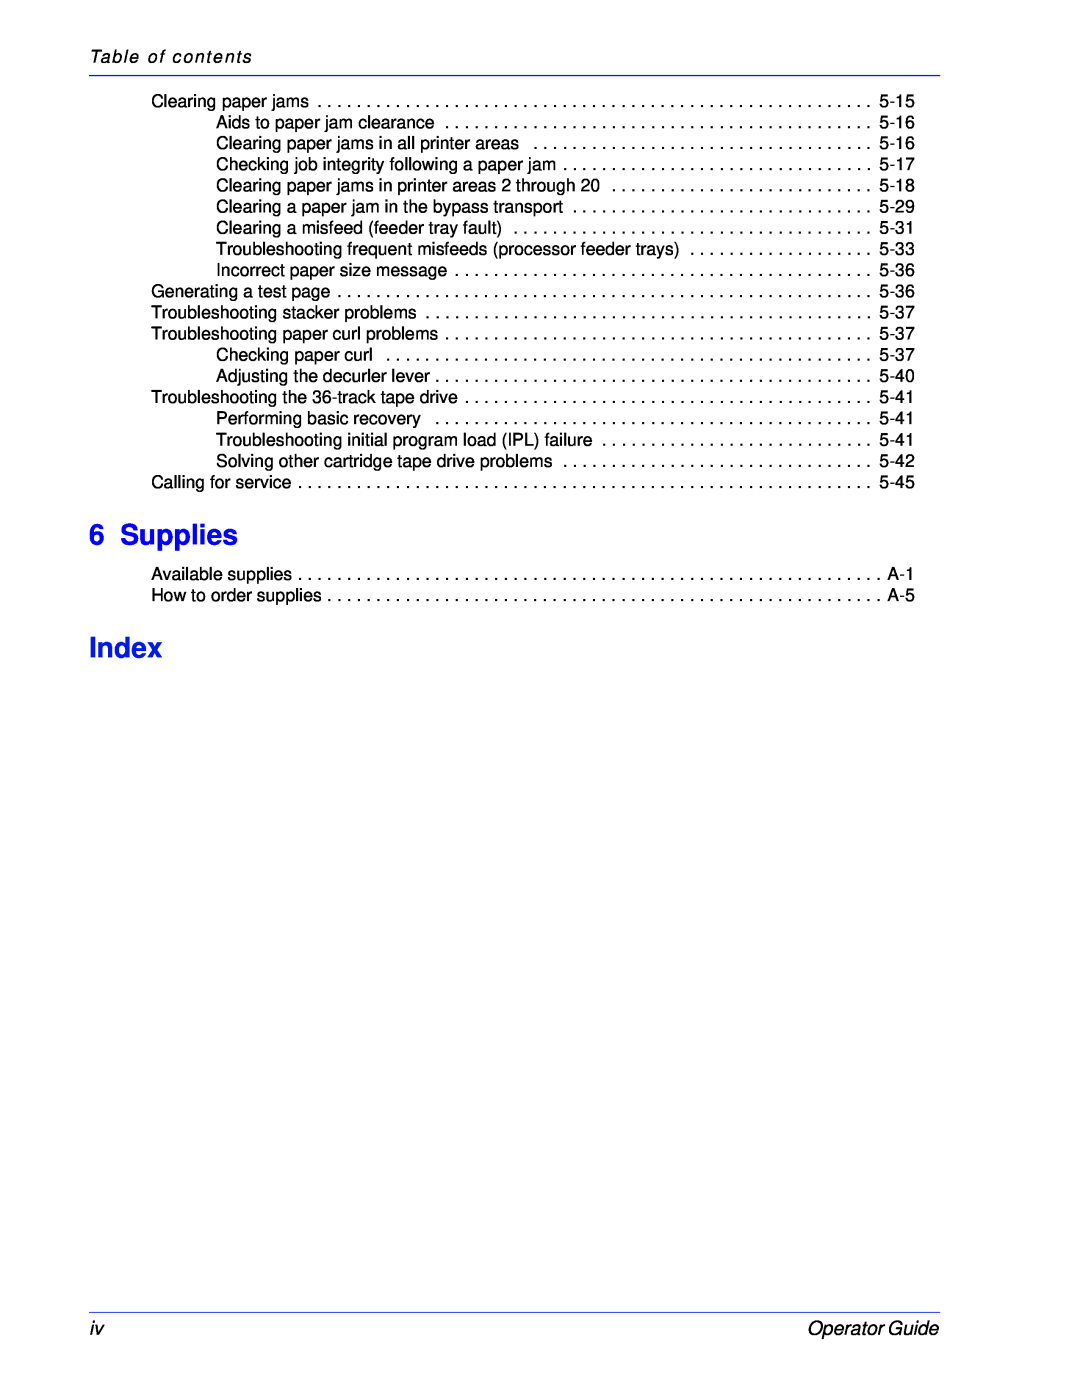 Xerox 100, 180 EPS manual Supplies, Index, Operator Guide, Table of contents 